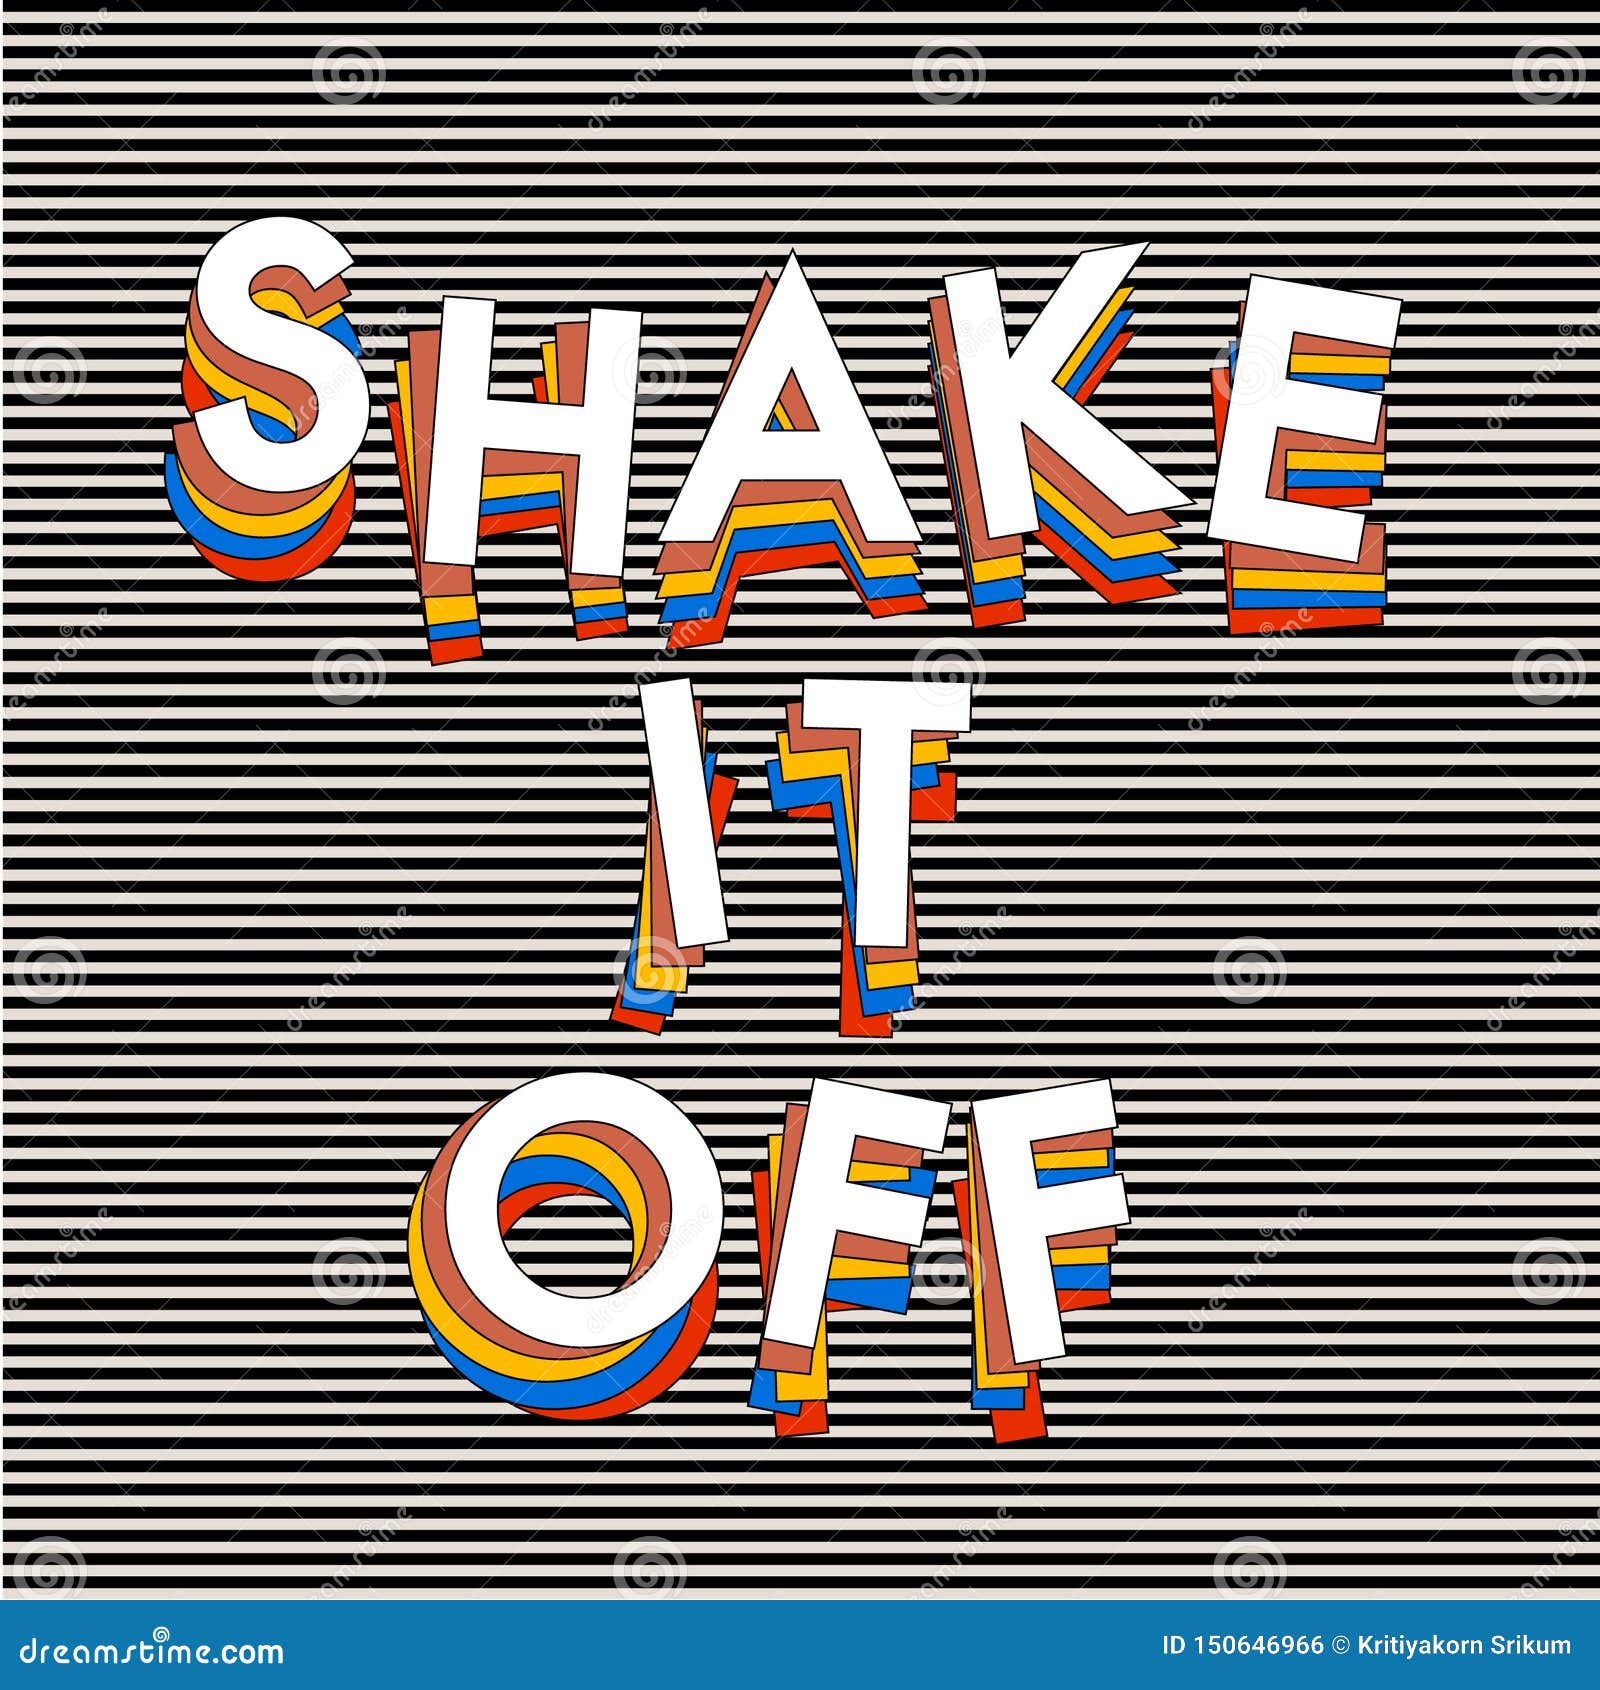 typo play in  postive quote or slogan Ã¢â¬Å shake it off